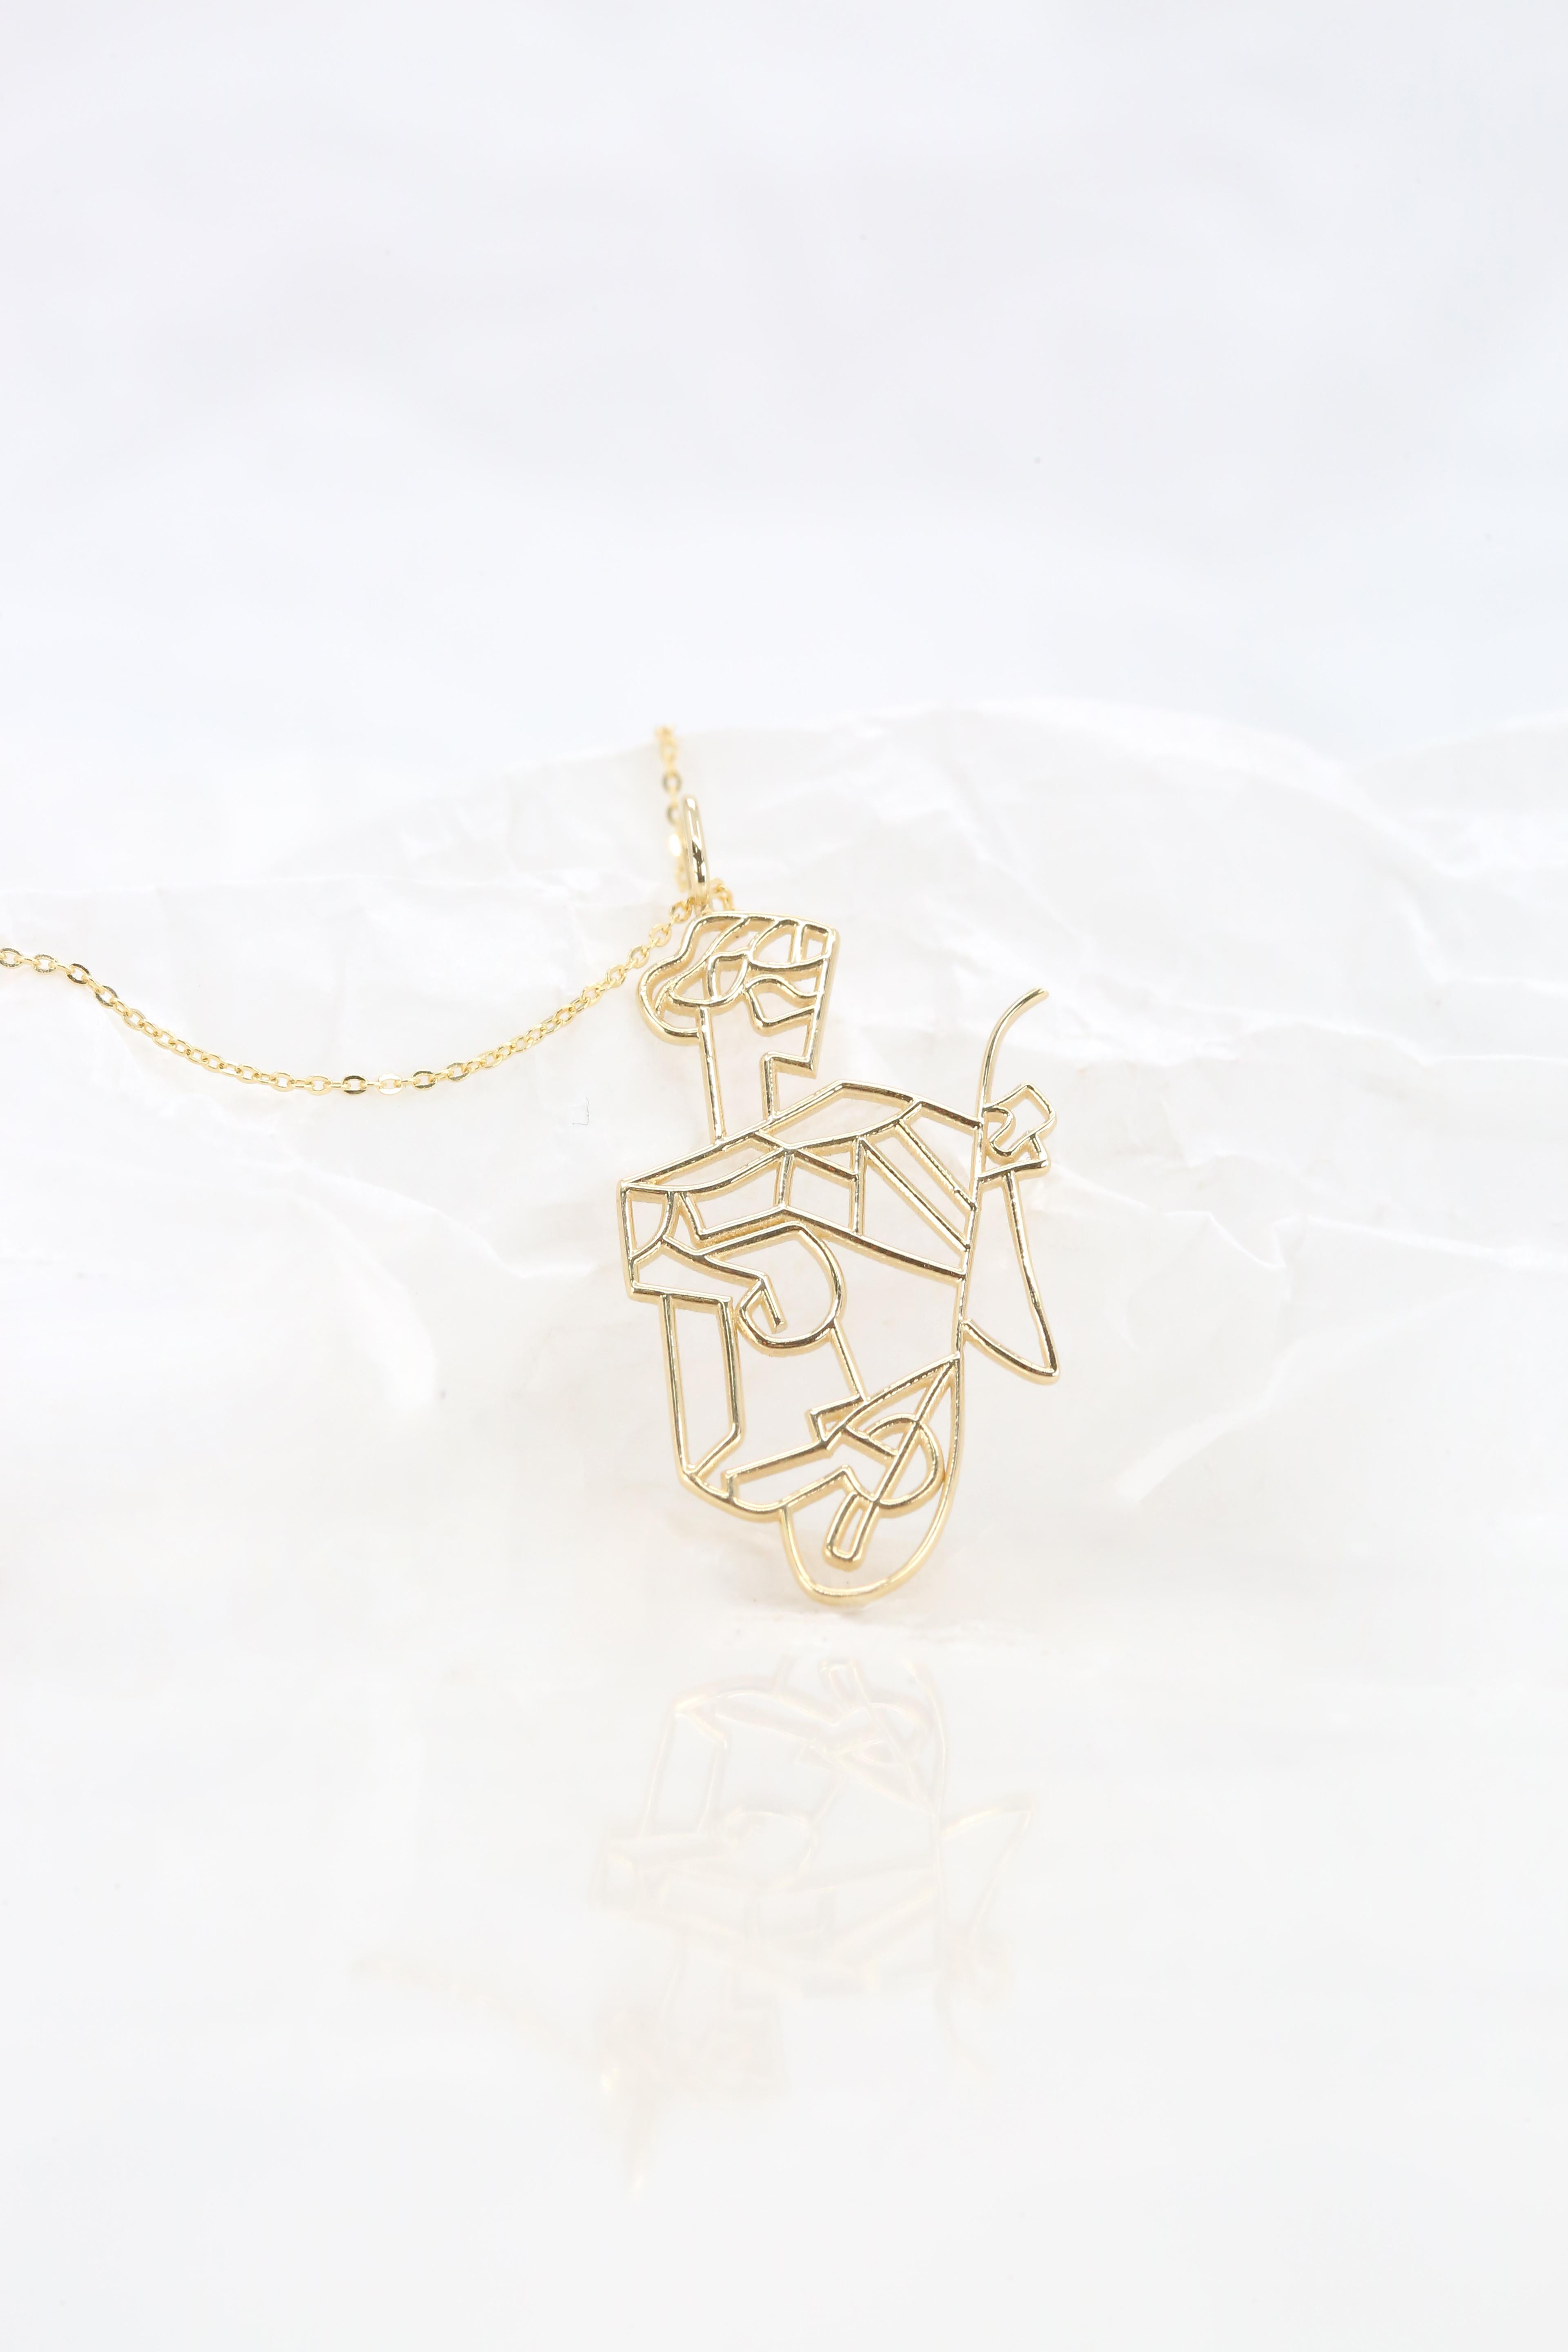 Modern 14K Gold Cubic Girl with a Mandoline Charm Necklace, Inspired by Picasso For Sale